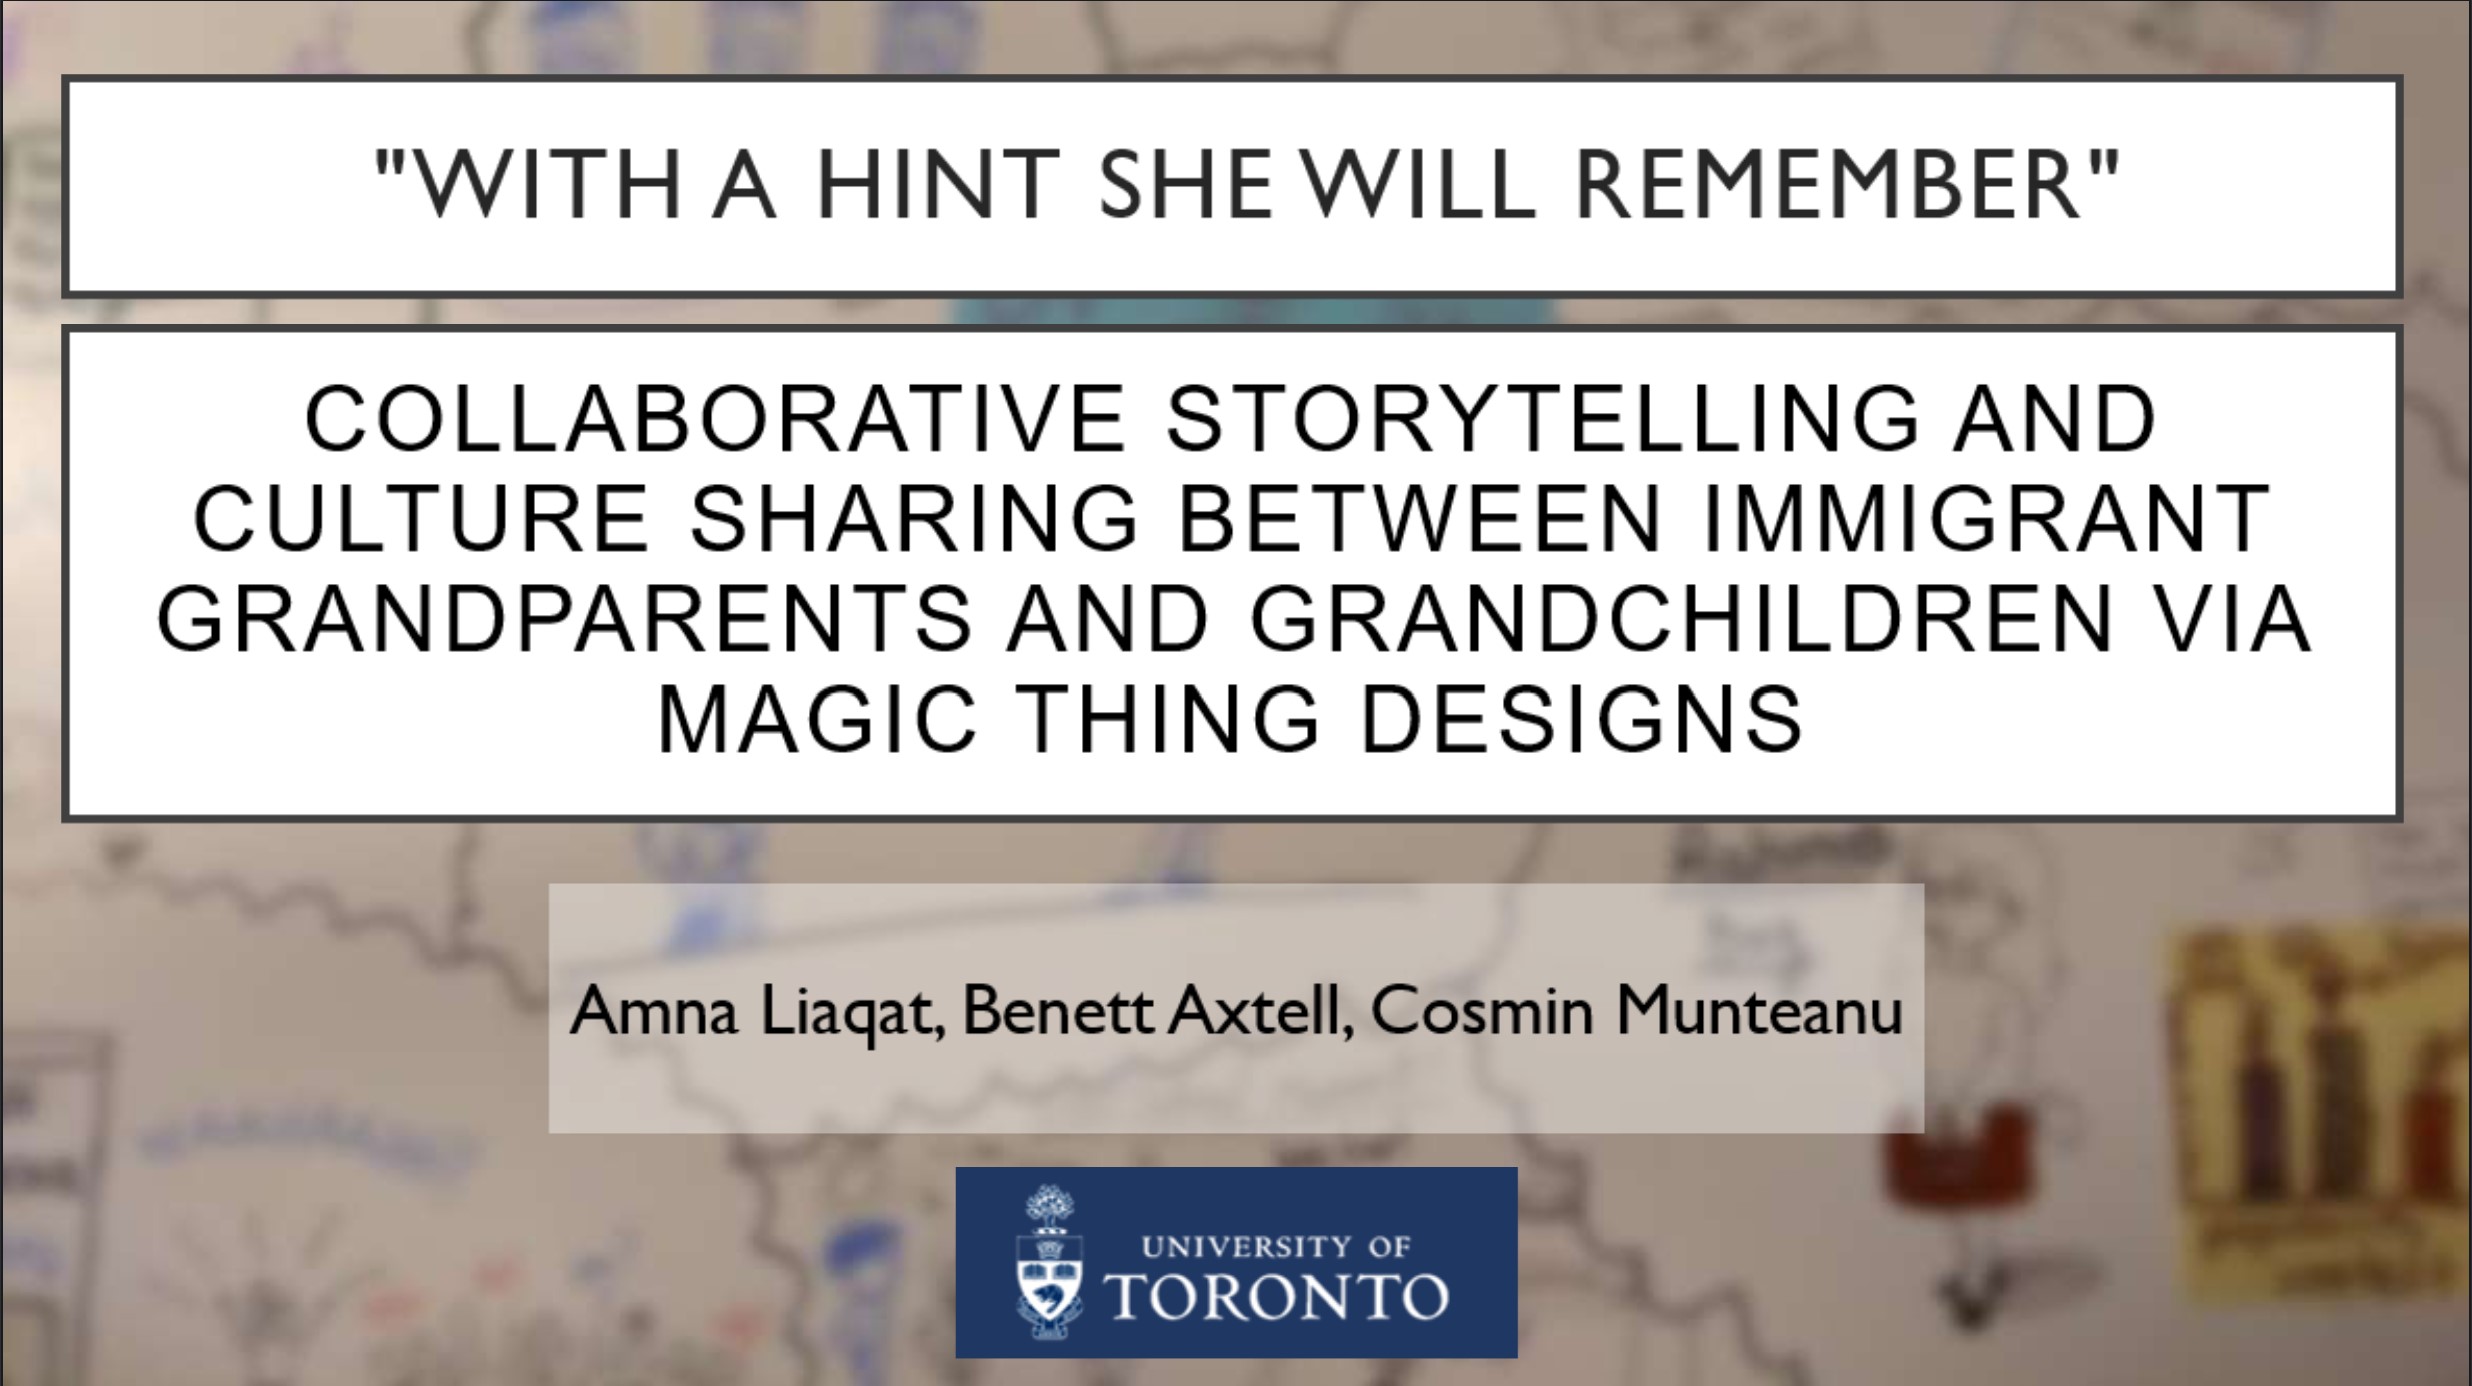 The first slide 'With a hint she will remember: Collaborative Storytelling and Culture Sharing between Immigrant Grandparents and Grandchildren Via Magic Thing Designs'